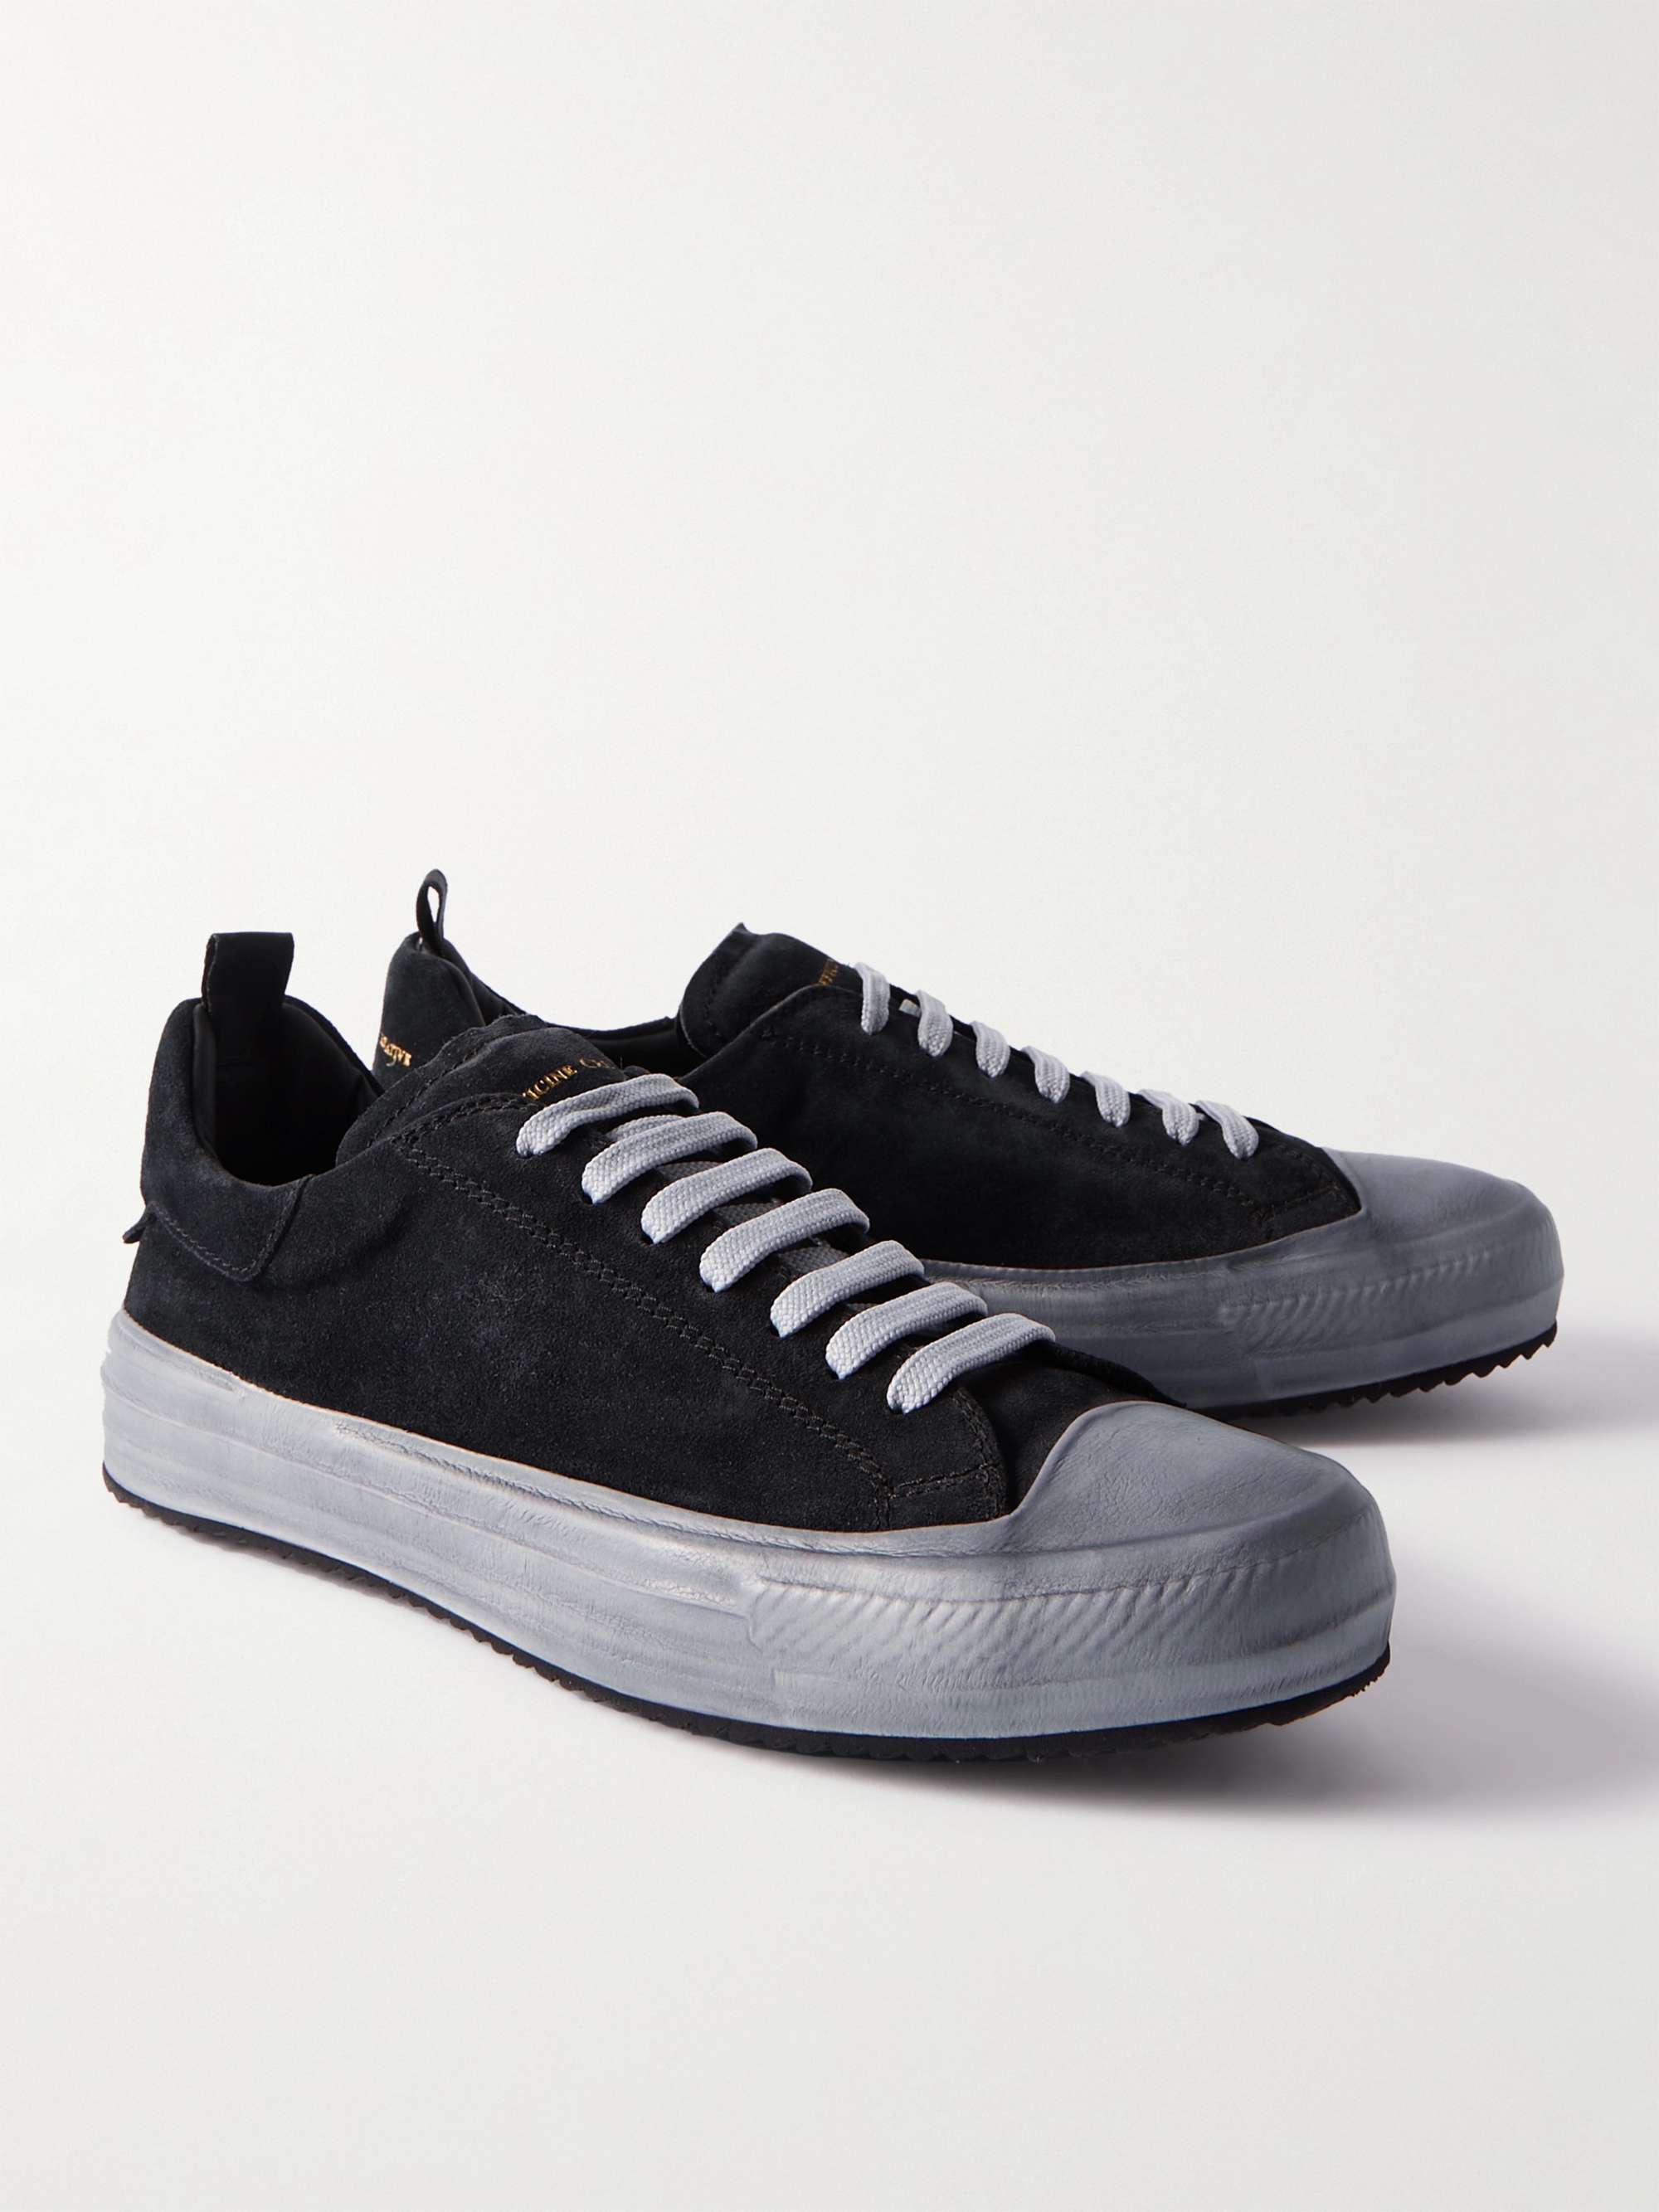 OFFICINE CREATIVE Mes Suede Sneakers for Men | MR PORTER